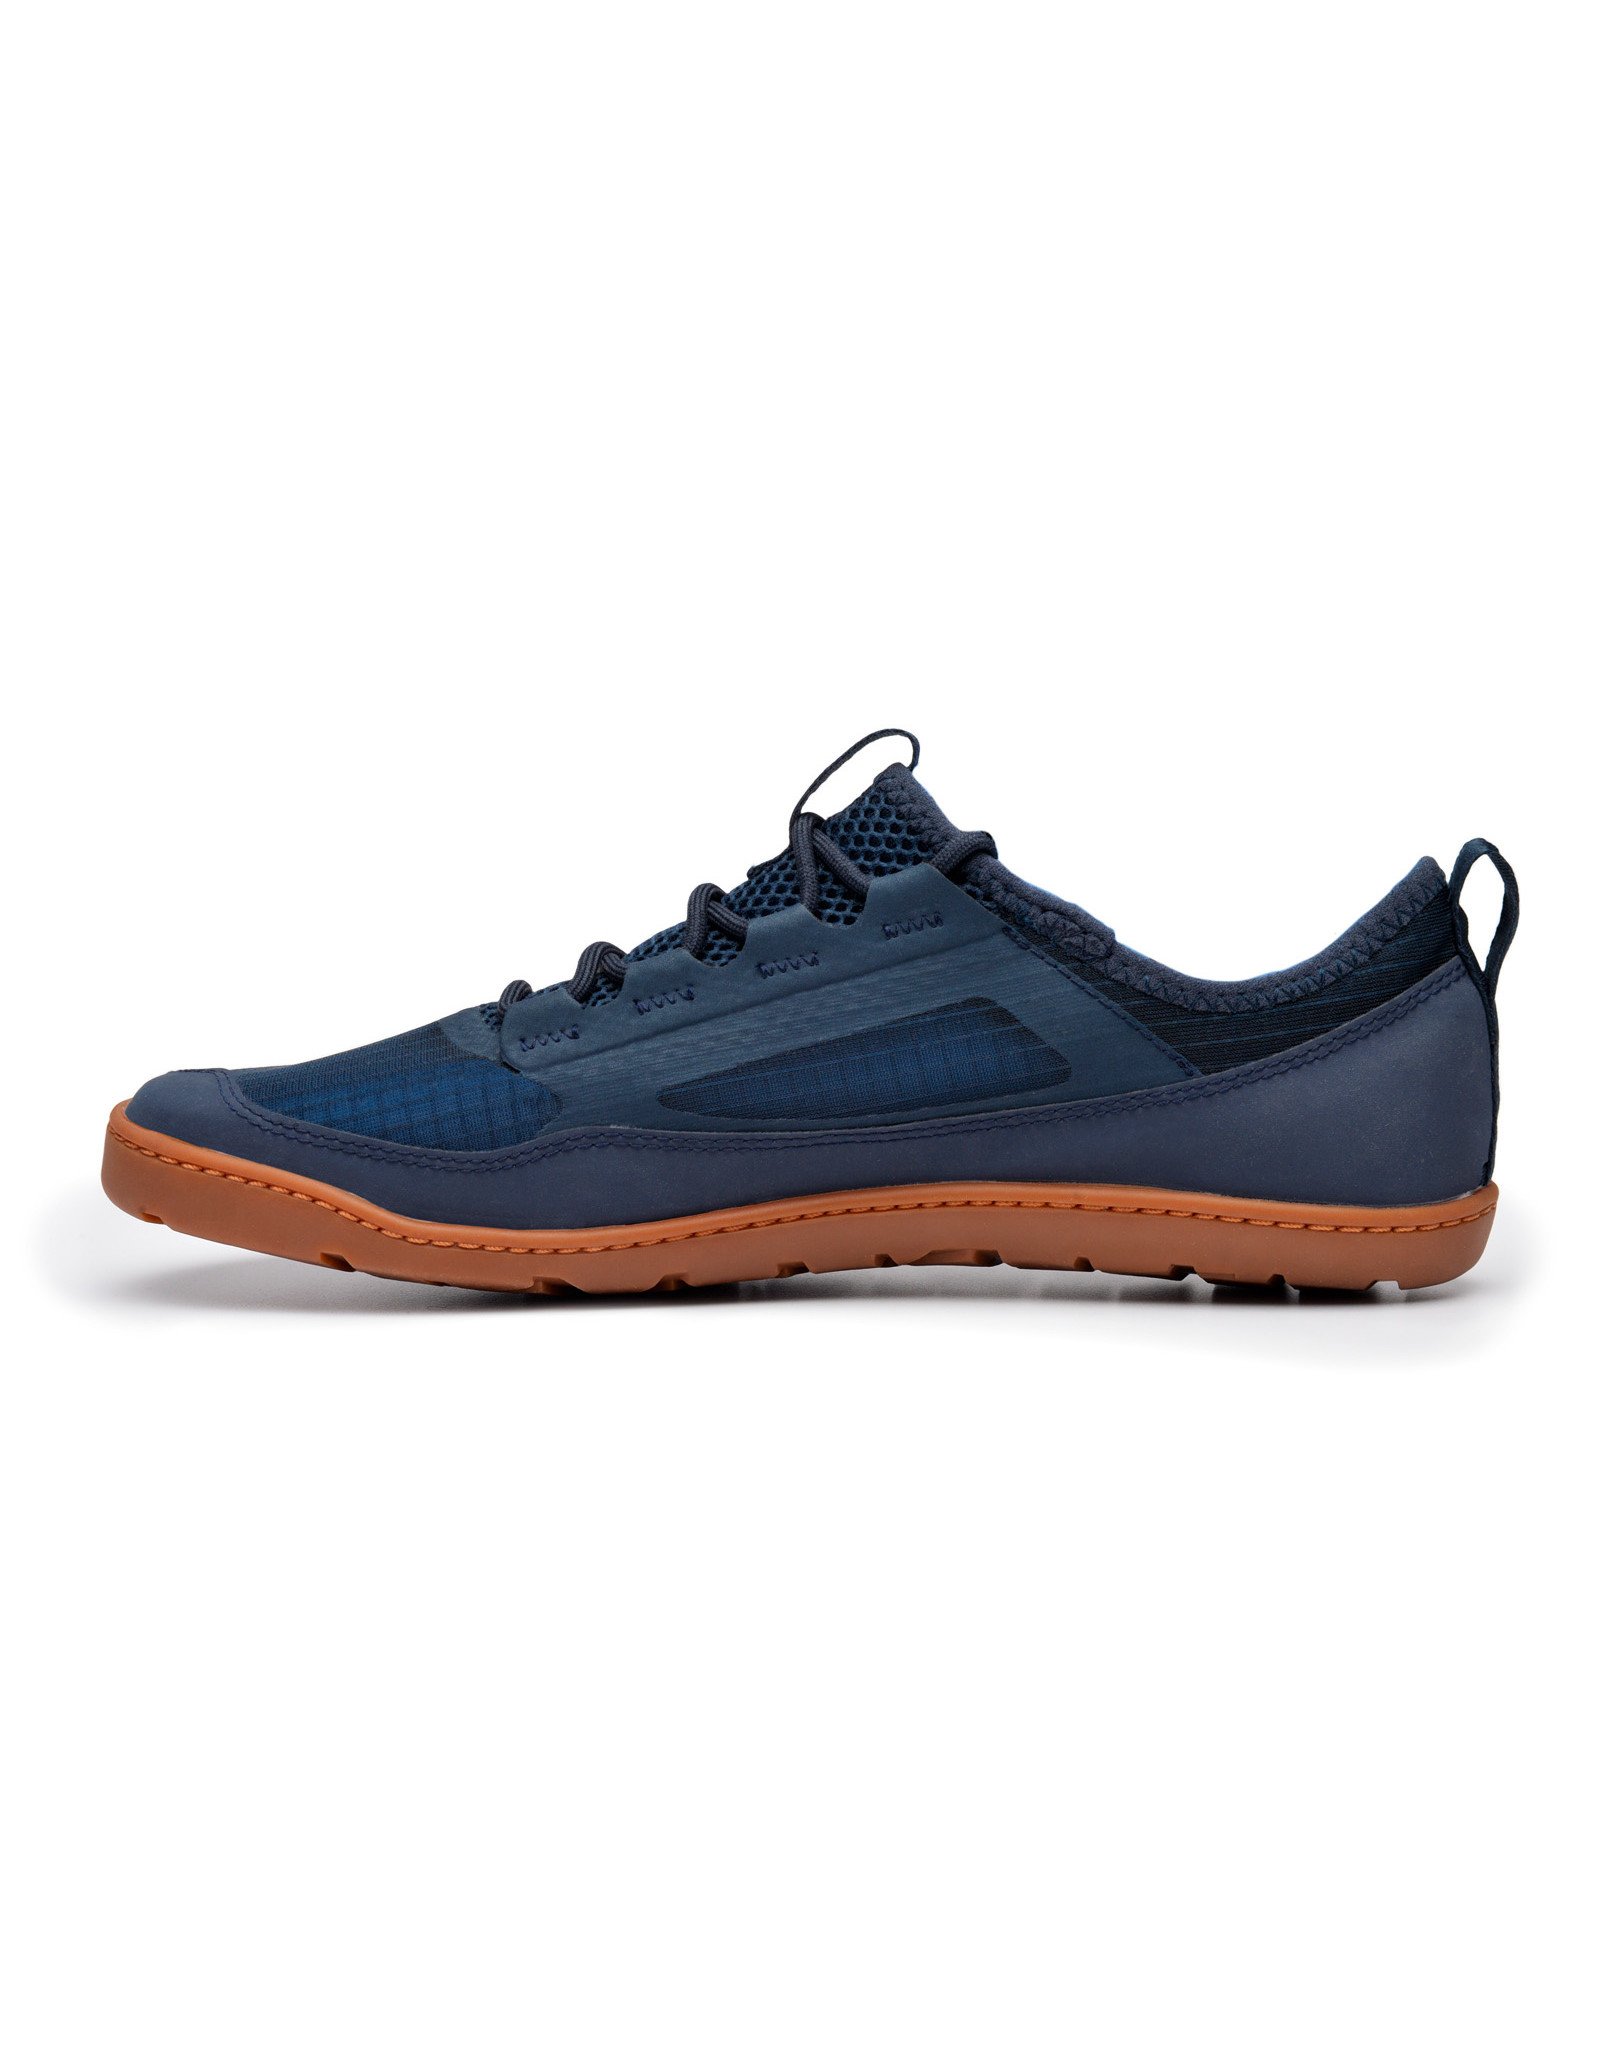 Astral Astral Loyak AC Shoes Mens - Classic Navy